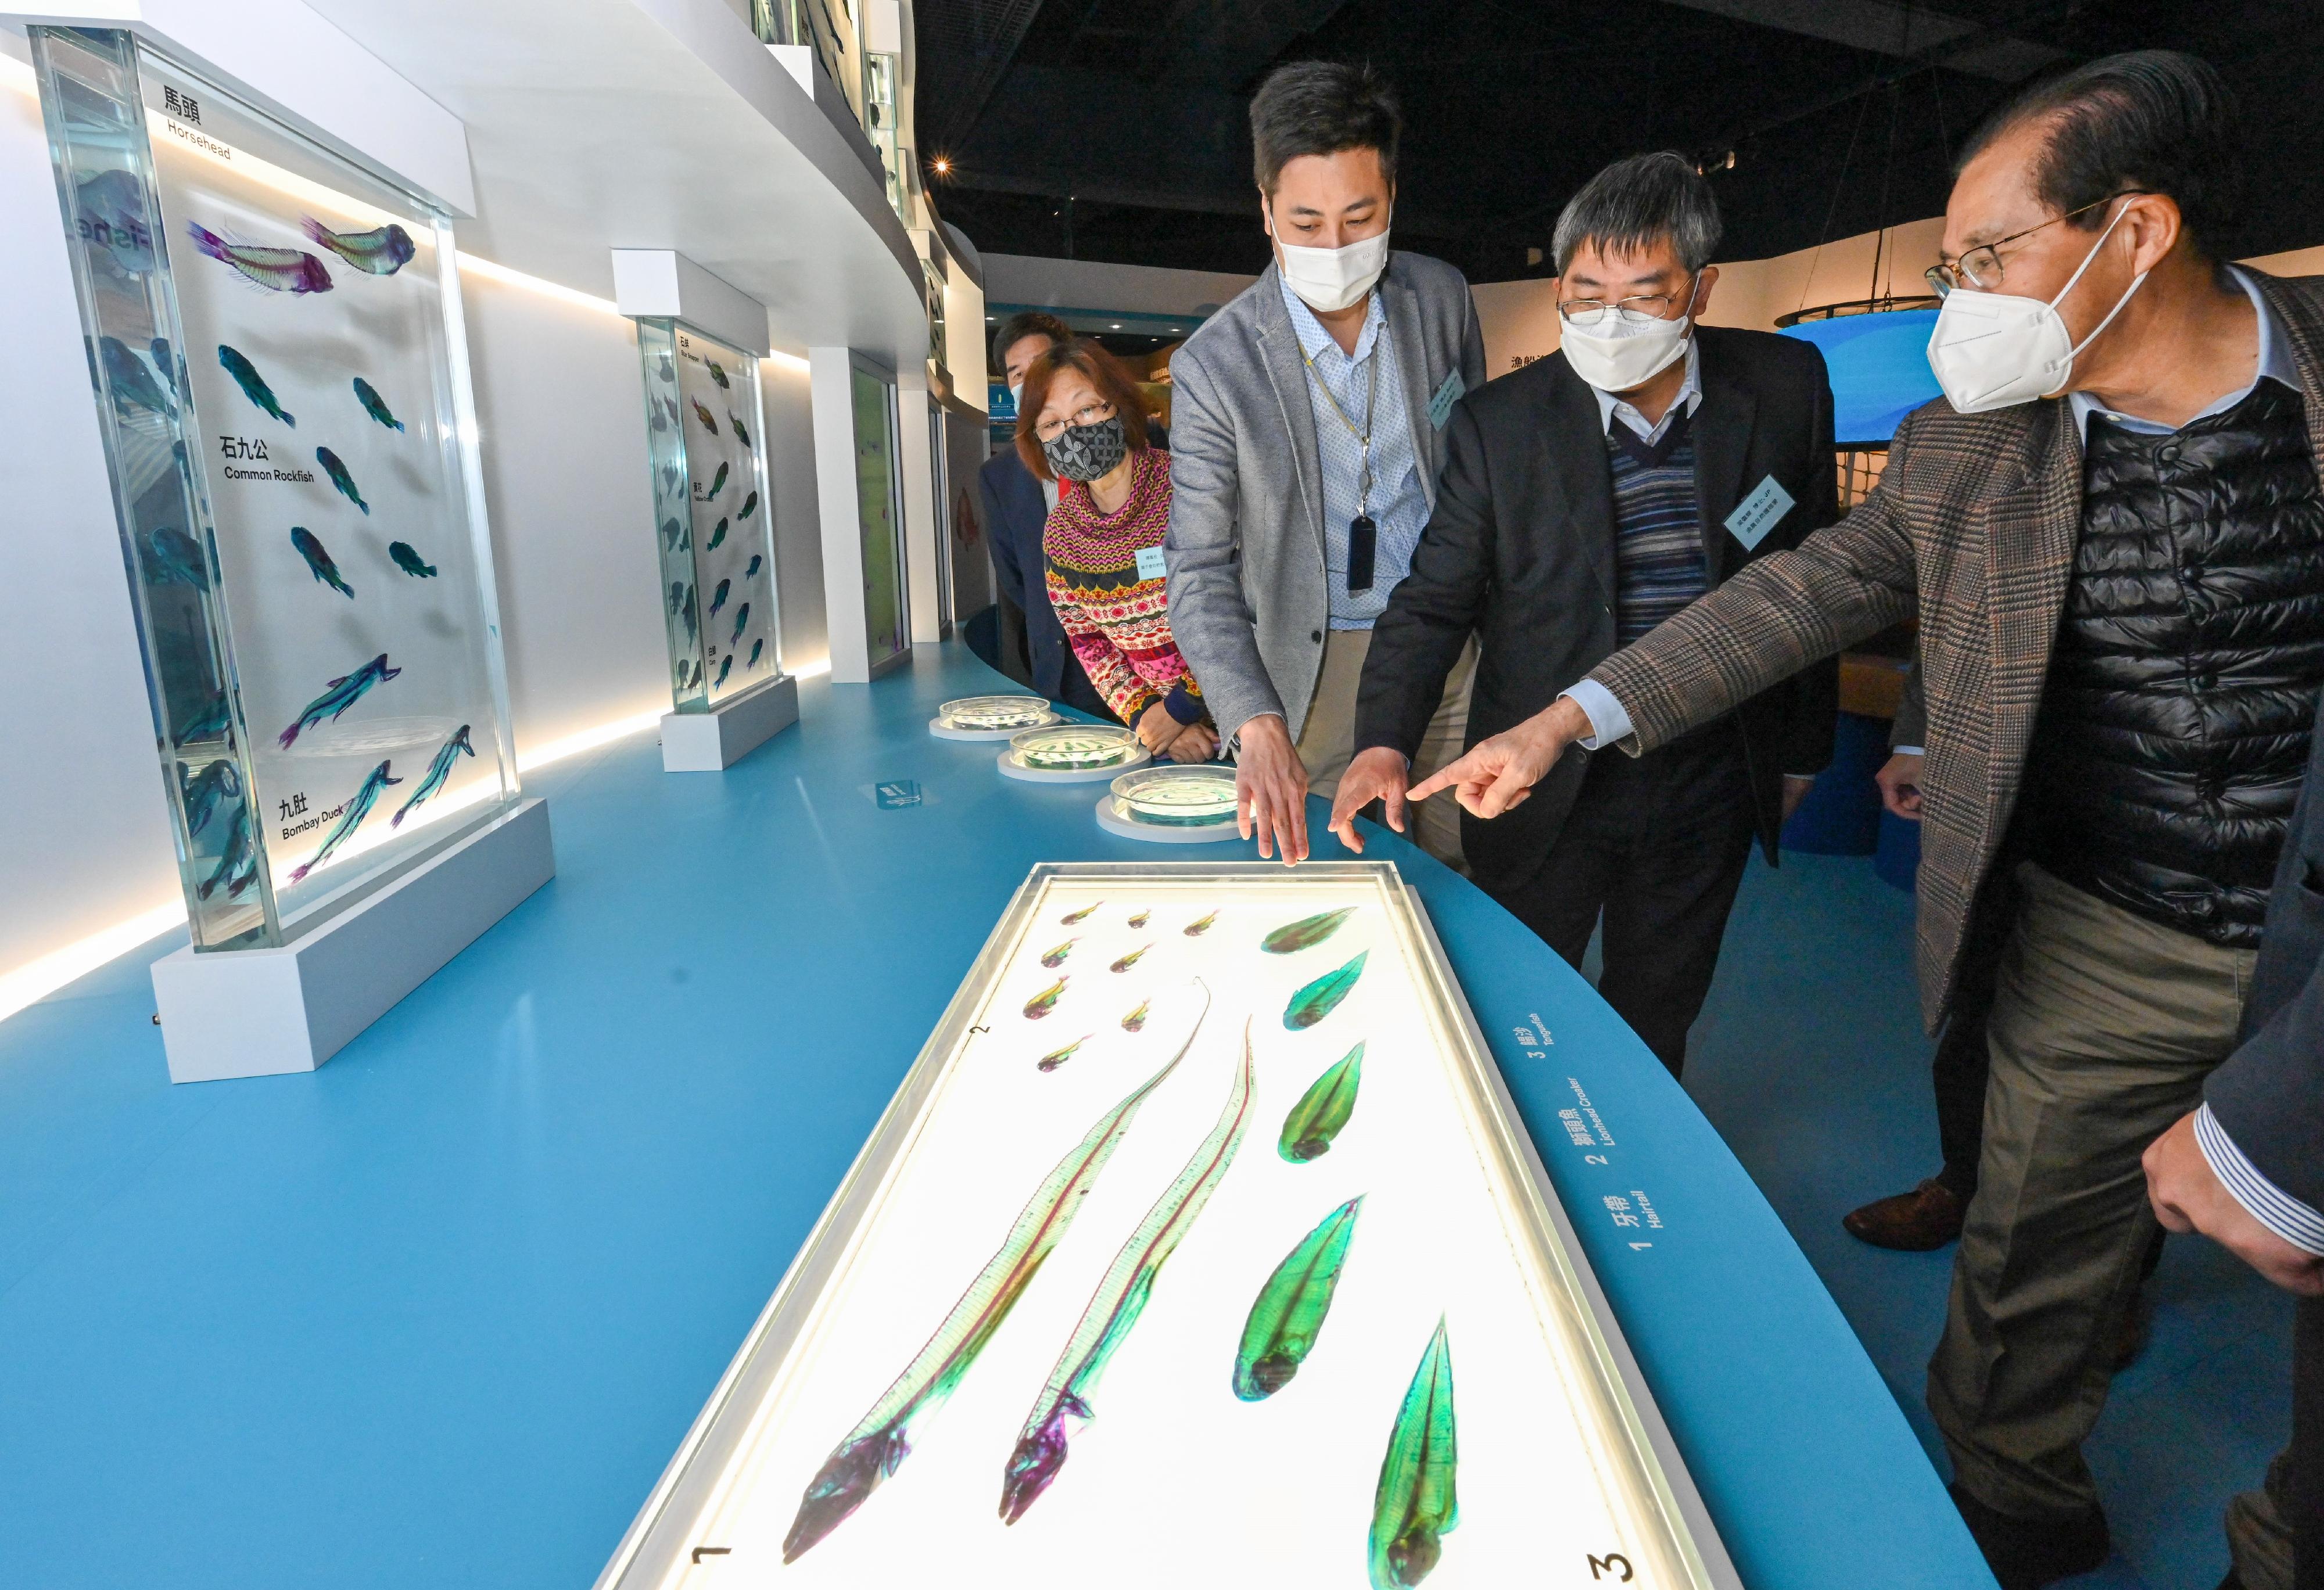 The Fisheries Hall located at the Lions Nature Education Centre at Tsiu Hang, Sai Kung, reopened today (December 16) upon completion of its revamp. Photo shows the Director of Agriculture, Fisheries and Conservation, Dr Leung Siu-fai (second right), Legislative Council Member Mr Steven Ho (third right) and other guests viewing a transparent fish specimen exhibition.